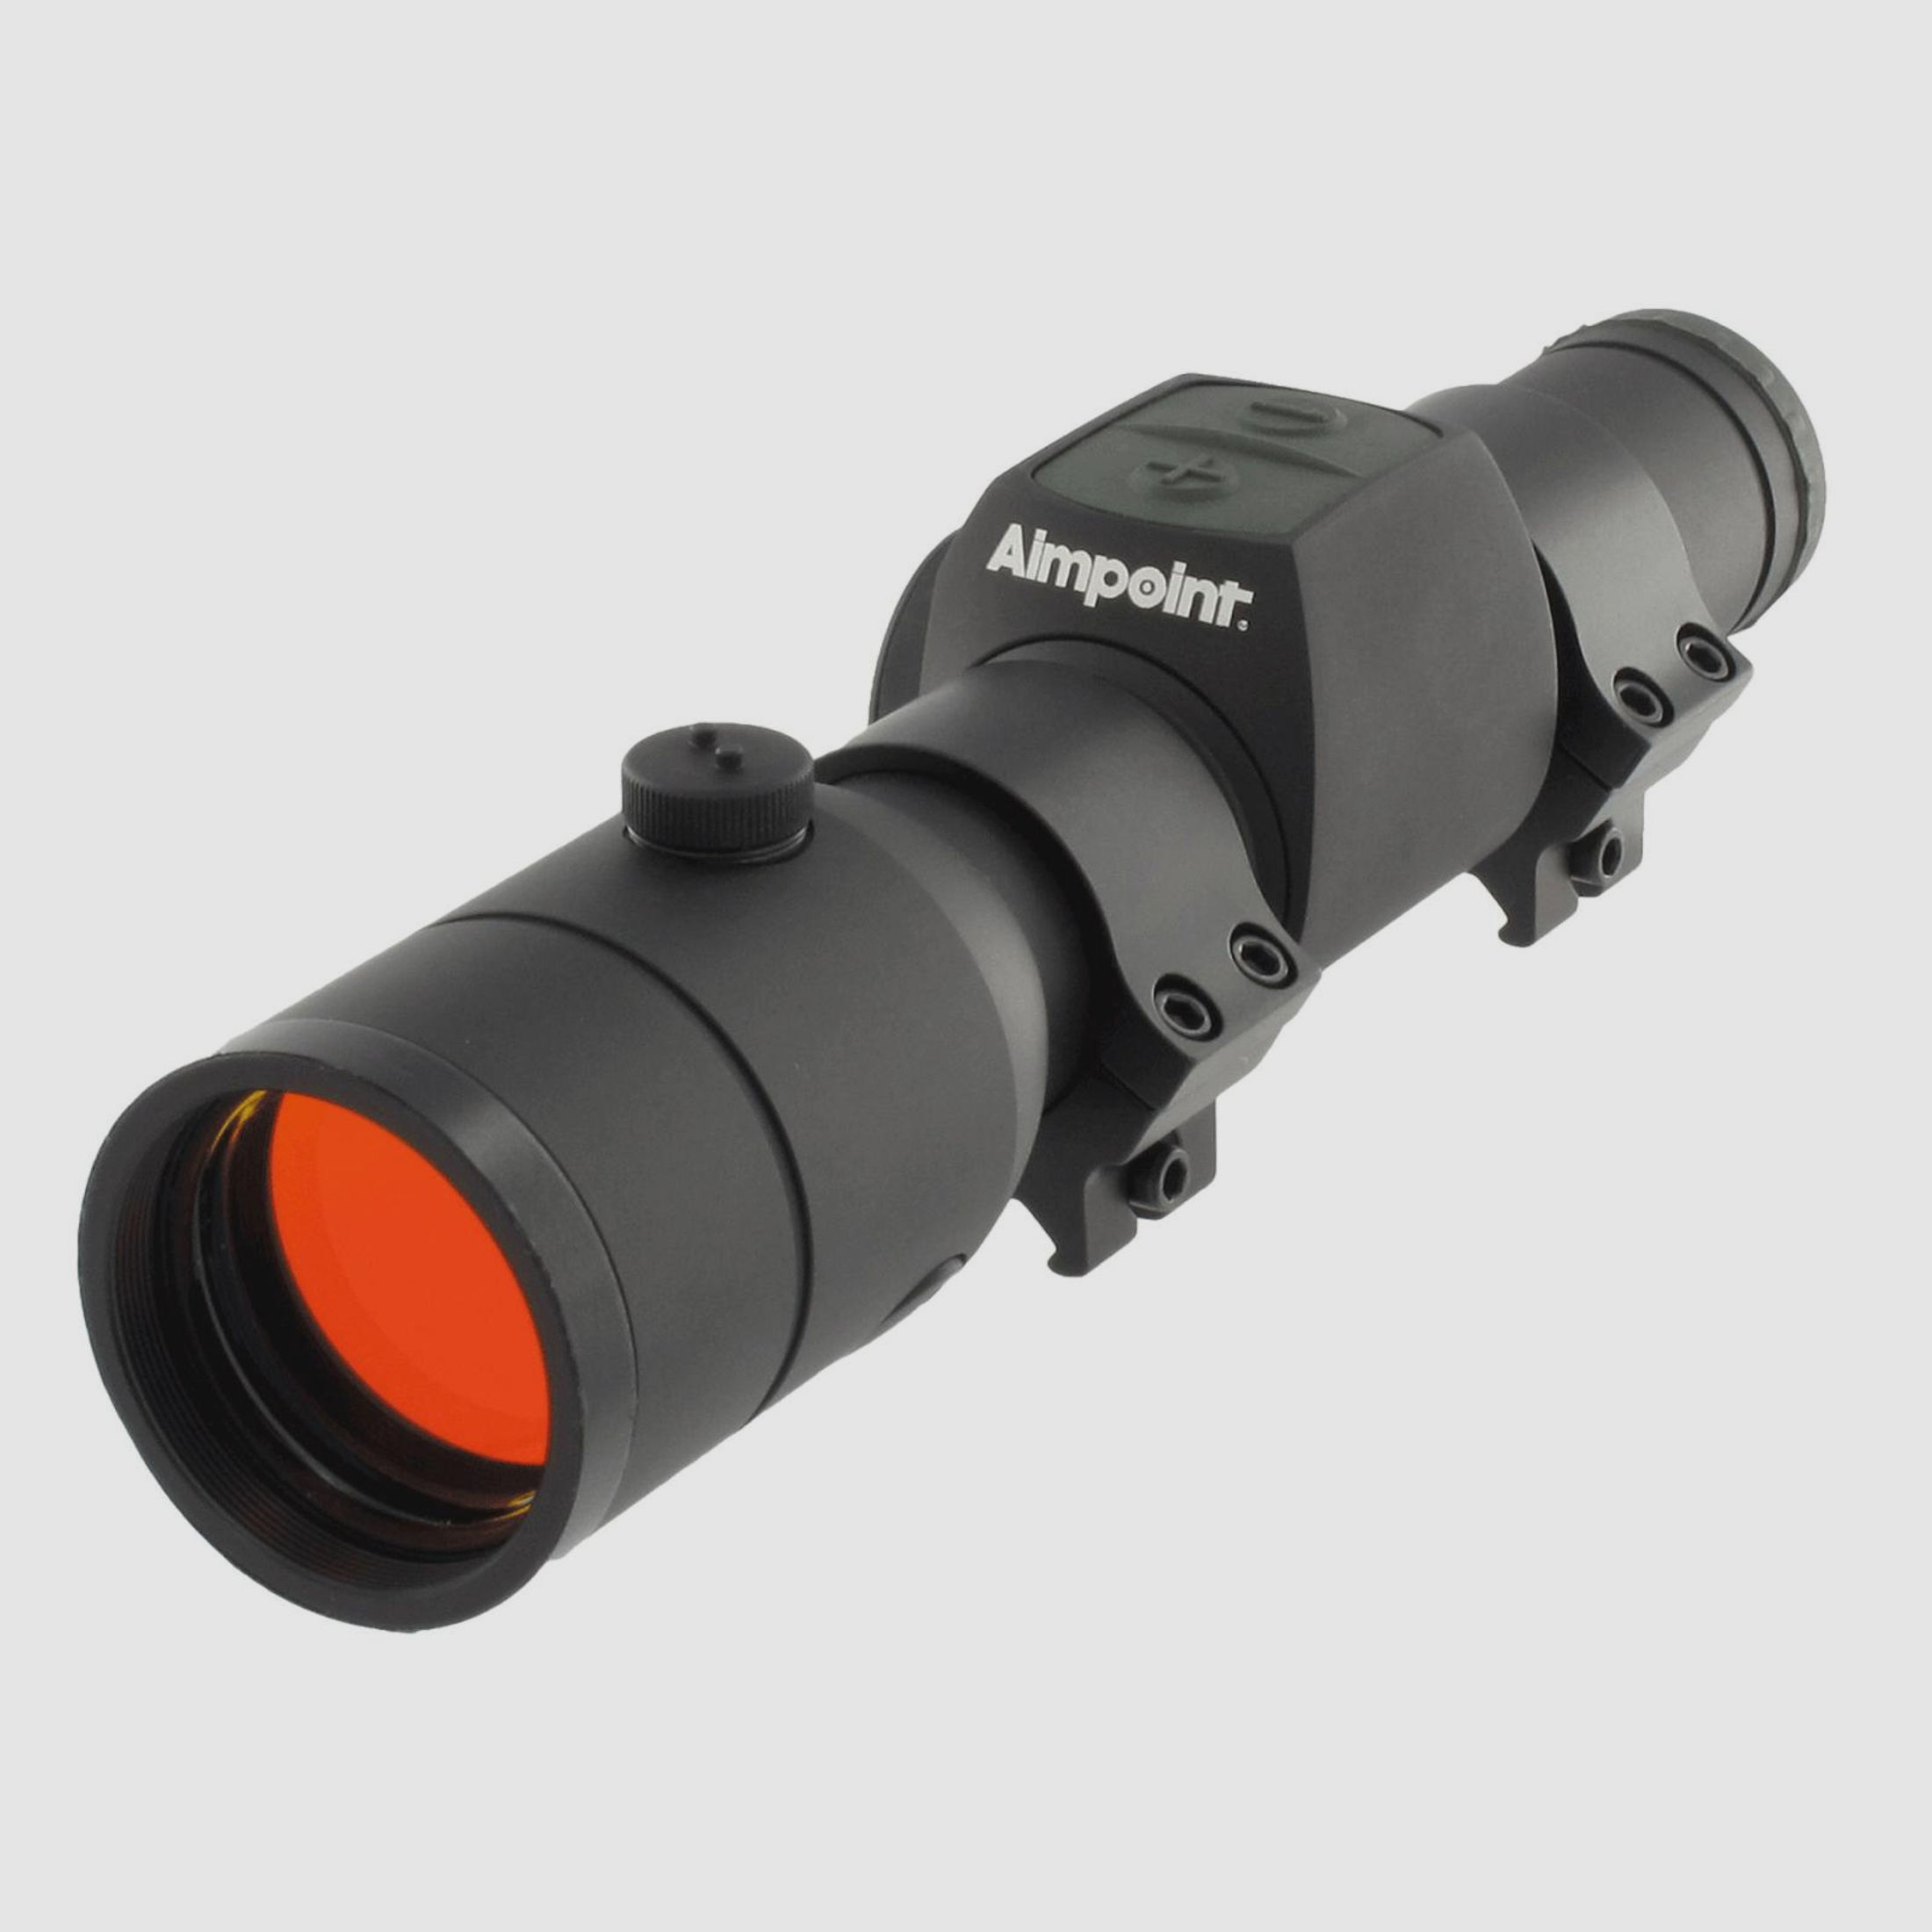 Aimpoint H30S 2 MOA ACET Technologie inkl. Flip-Up-Deckel